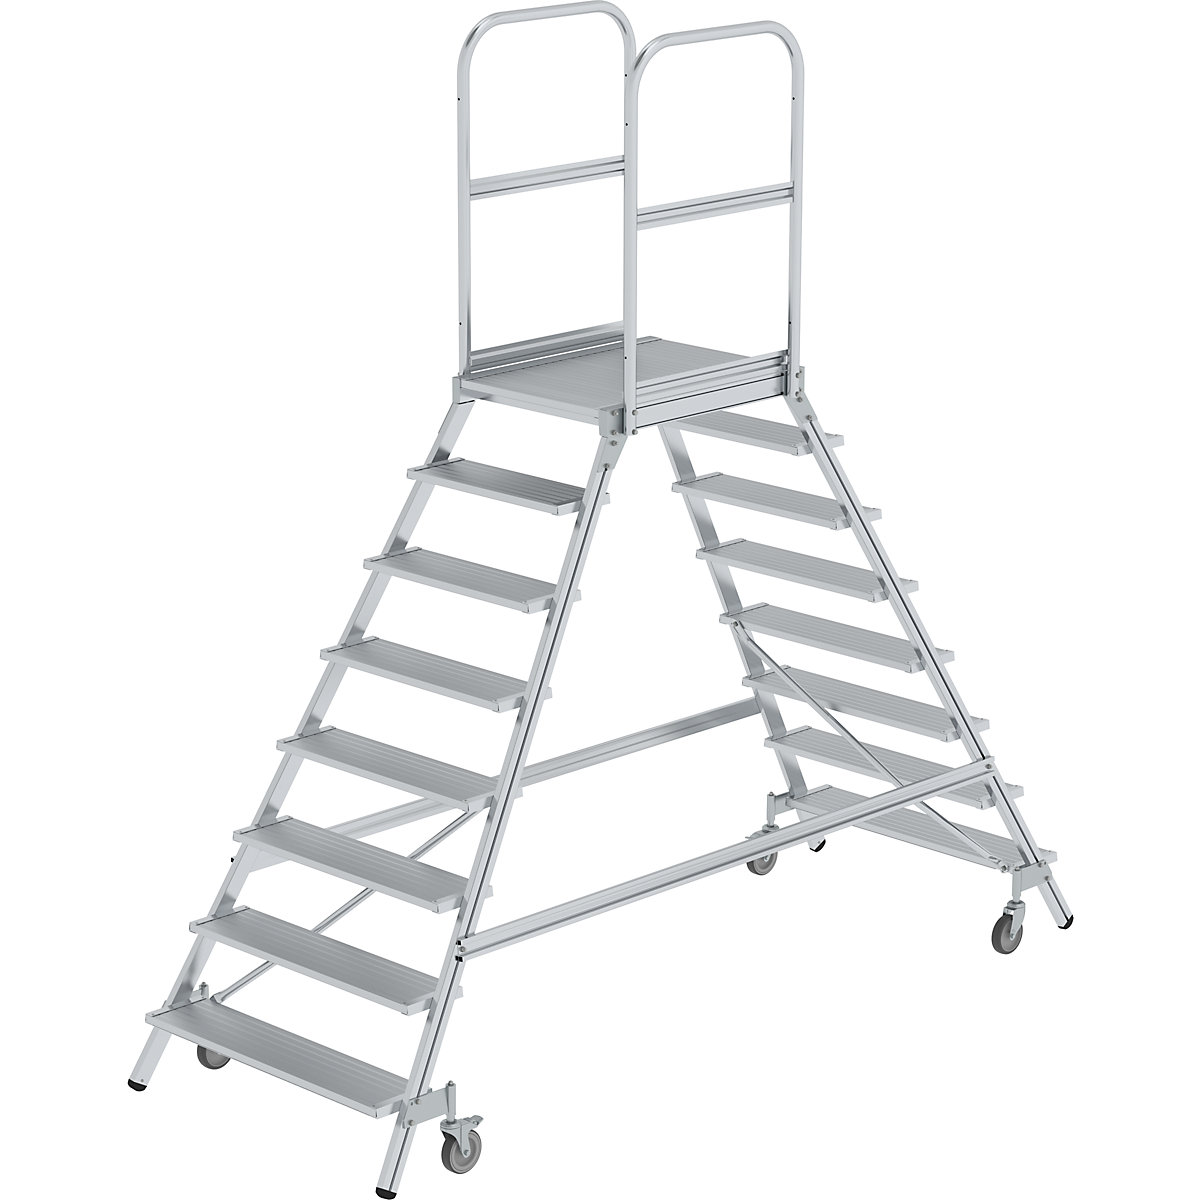 Platform steps with double sided access – MUNK, platform and steps made of light alloy, 2 x 8 steps incl. platform-3